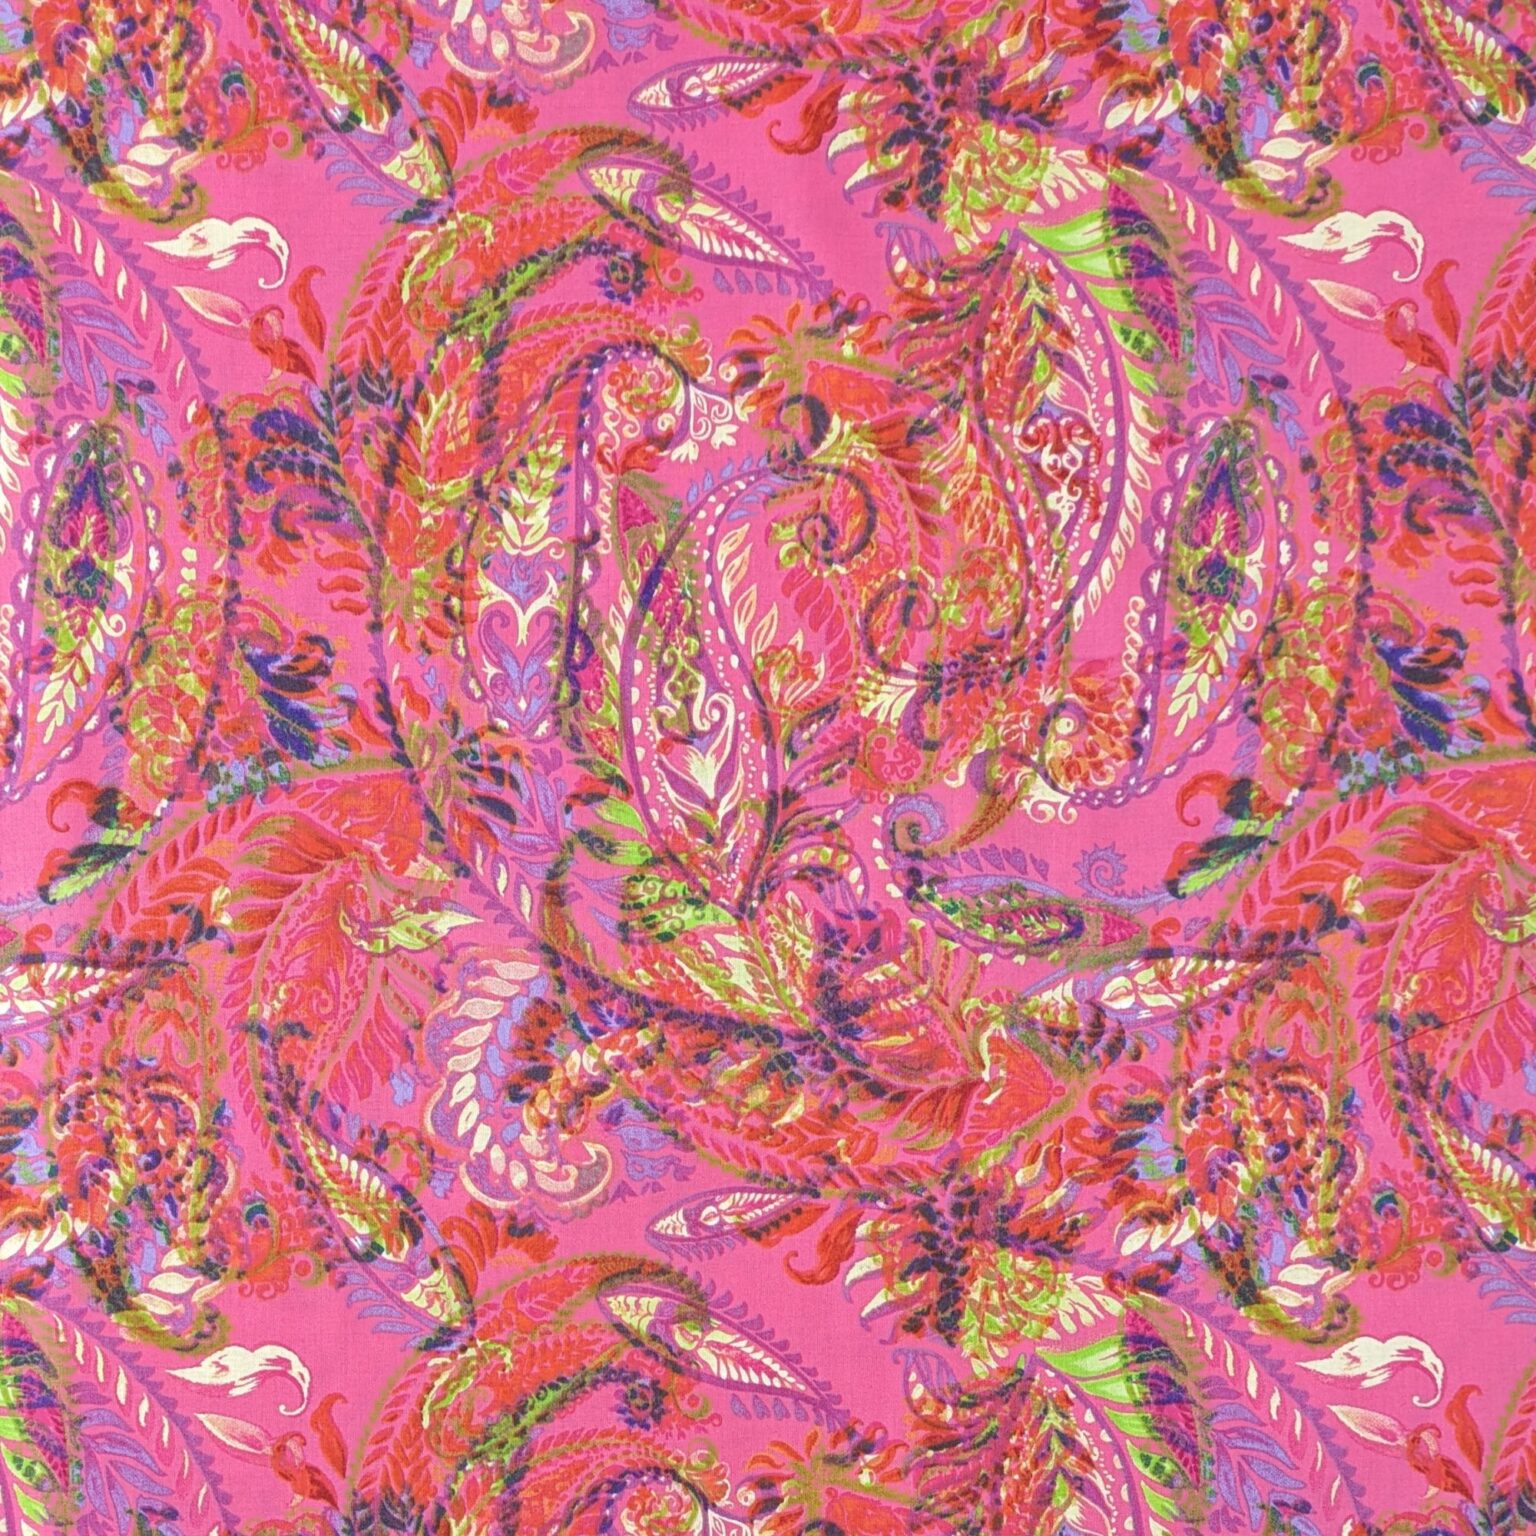 Pima Cotton Lawn Fabric - Bright Paisley - 140cm Wide at More Sewing